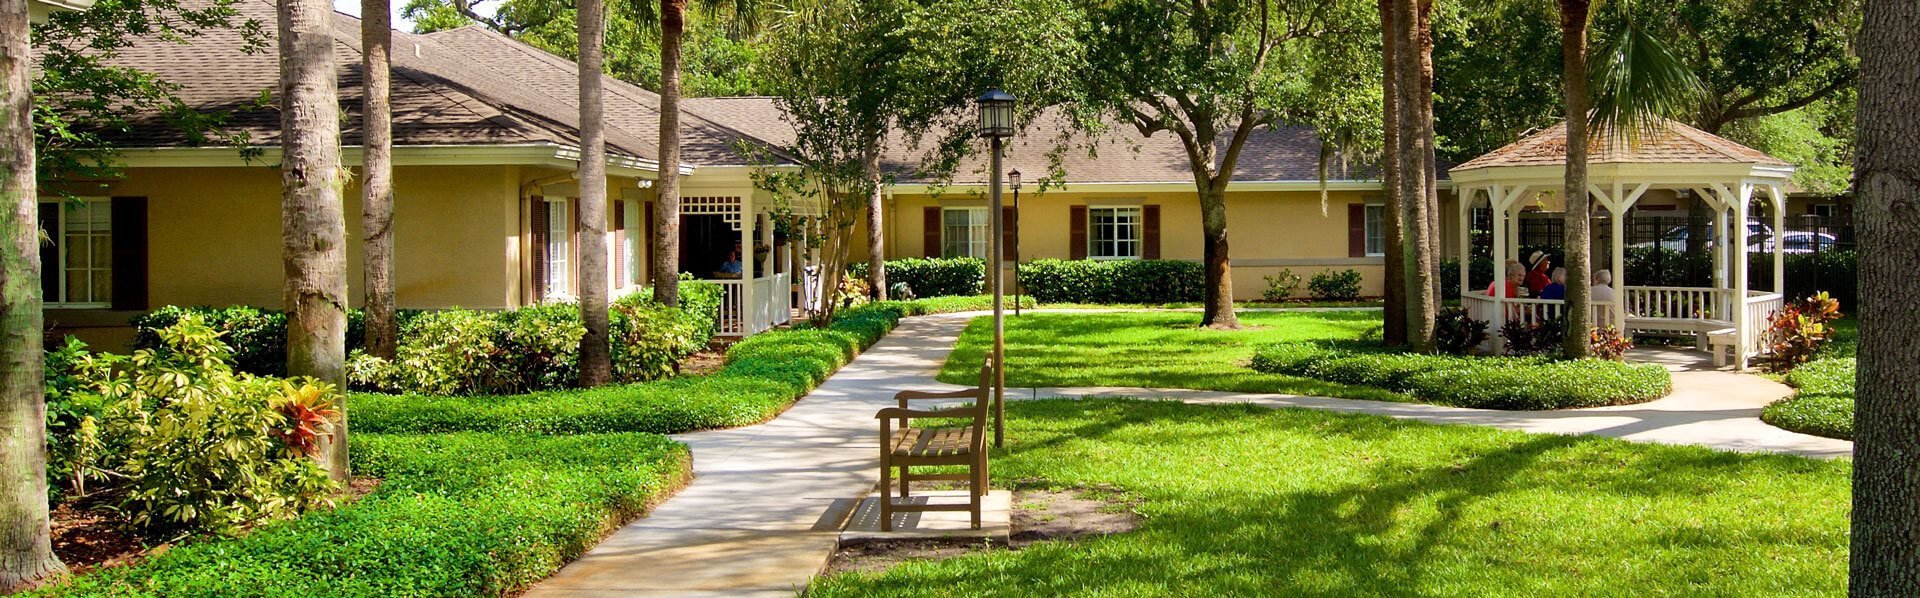 Picturesque Garden Setting  at Pacifica Senior Living Belleair, Clearwater, 33756